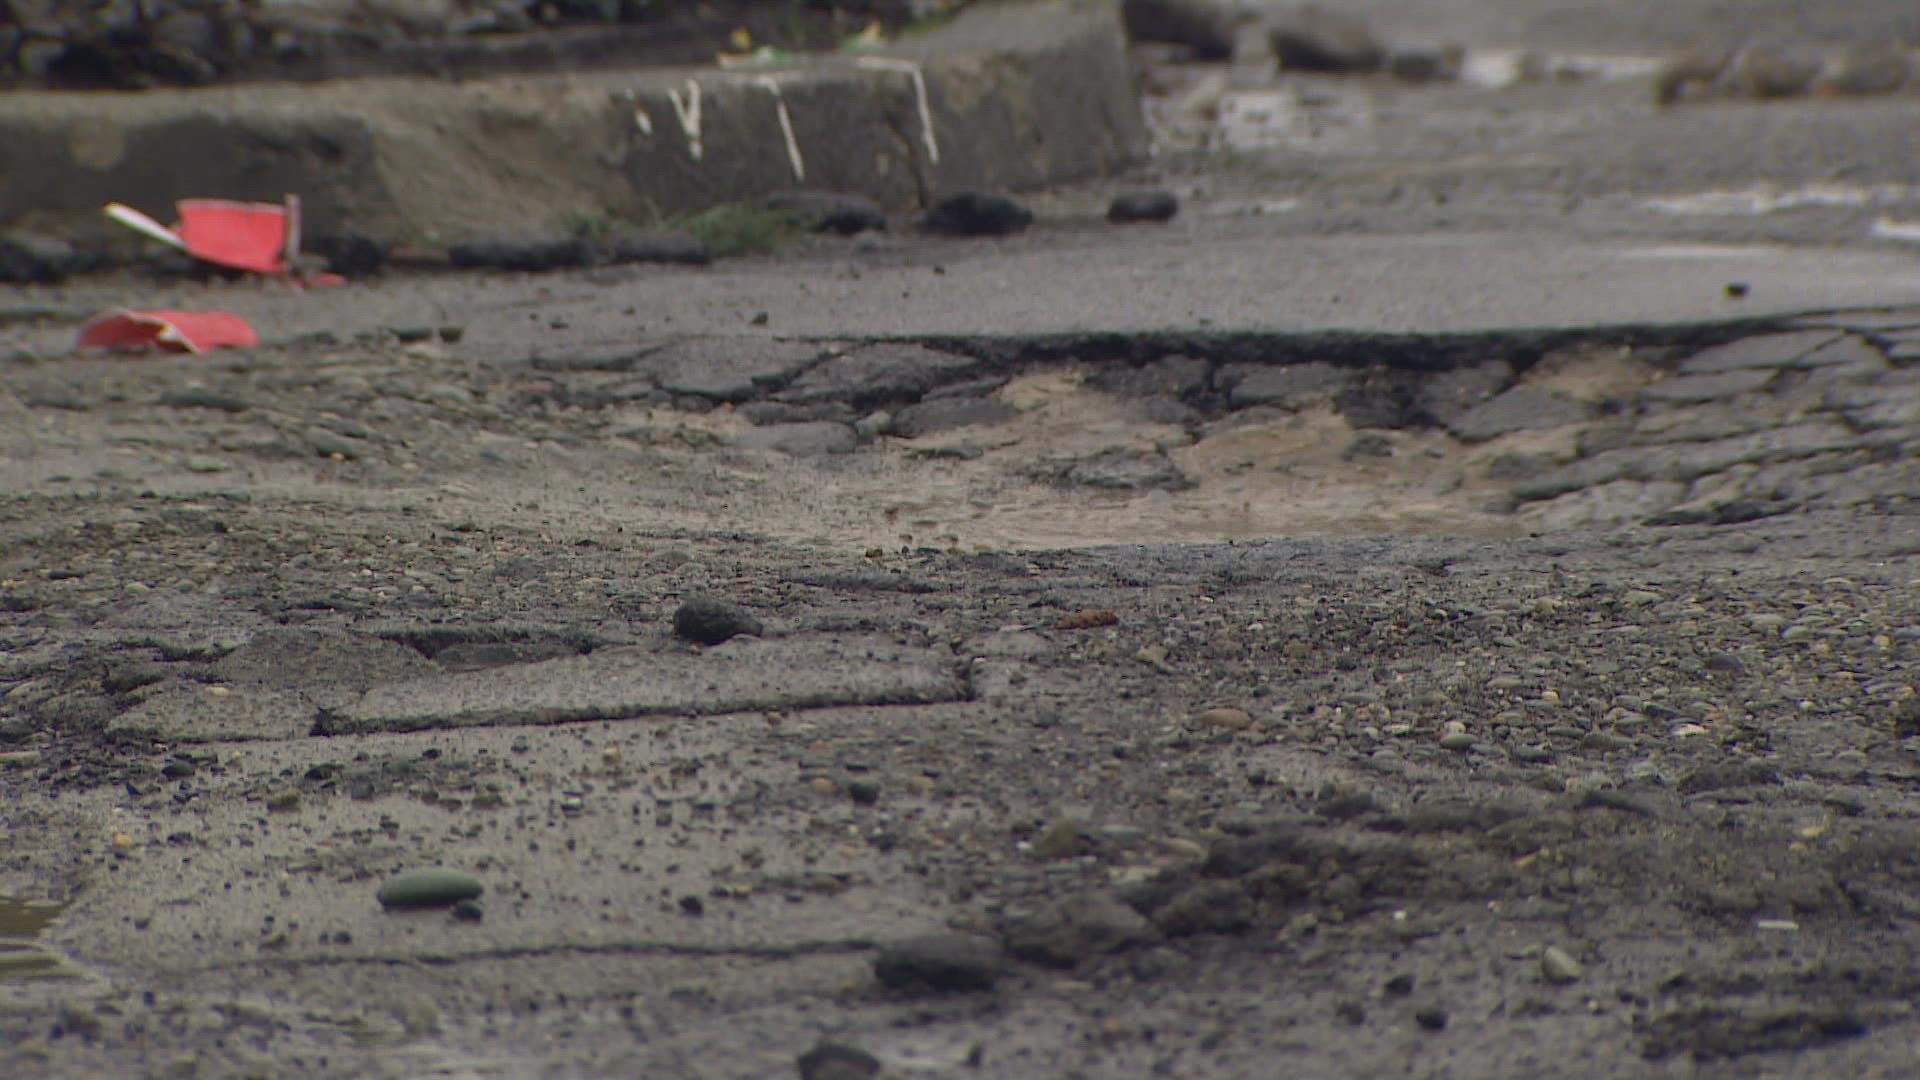 According to SDOT, crews filled more than 14,000 potholes in 2021, but it expects some of those to reappear.